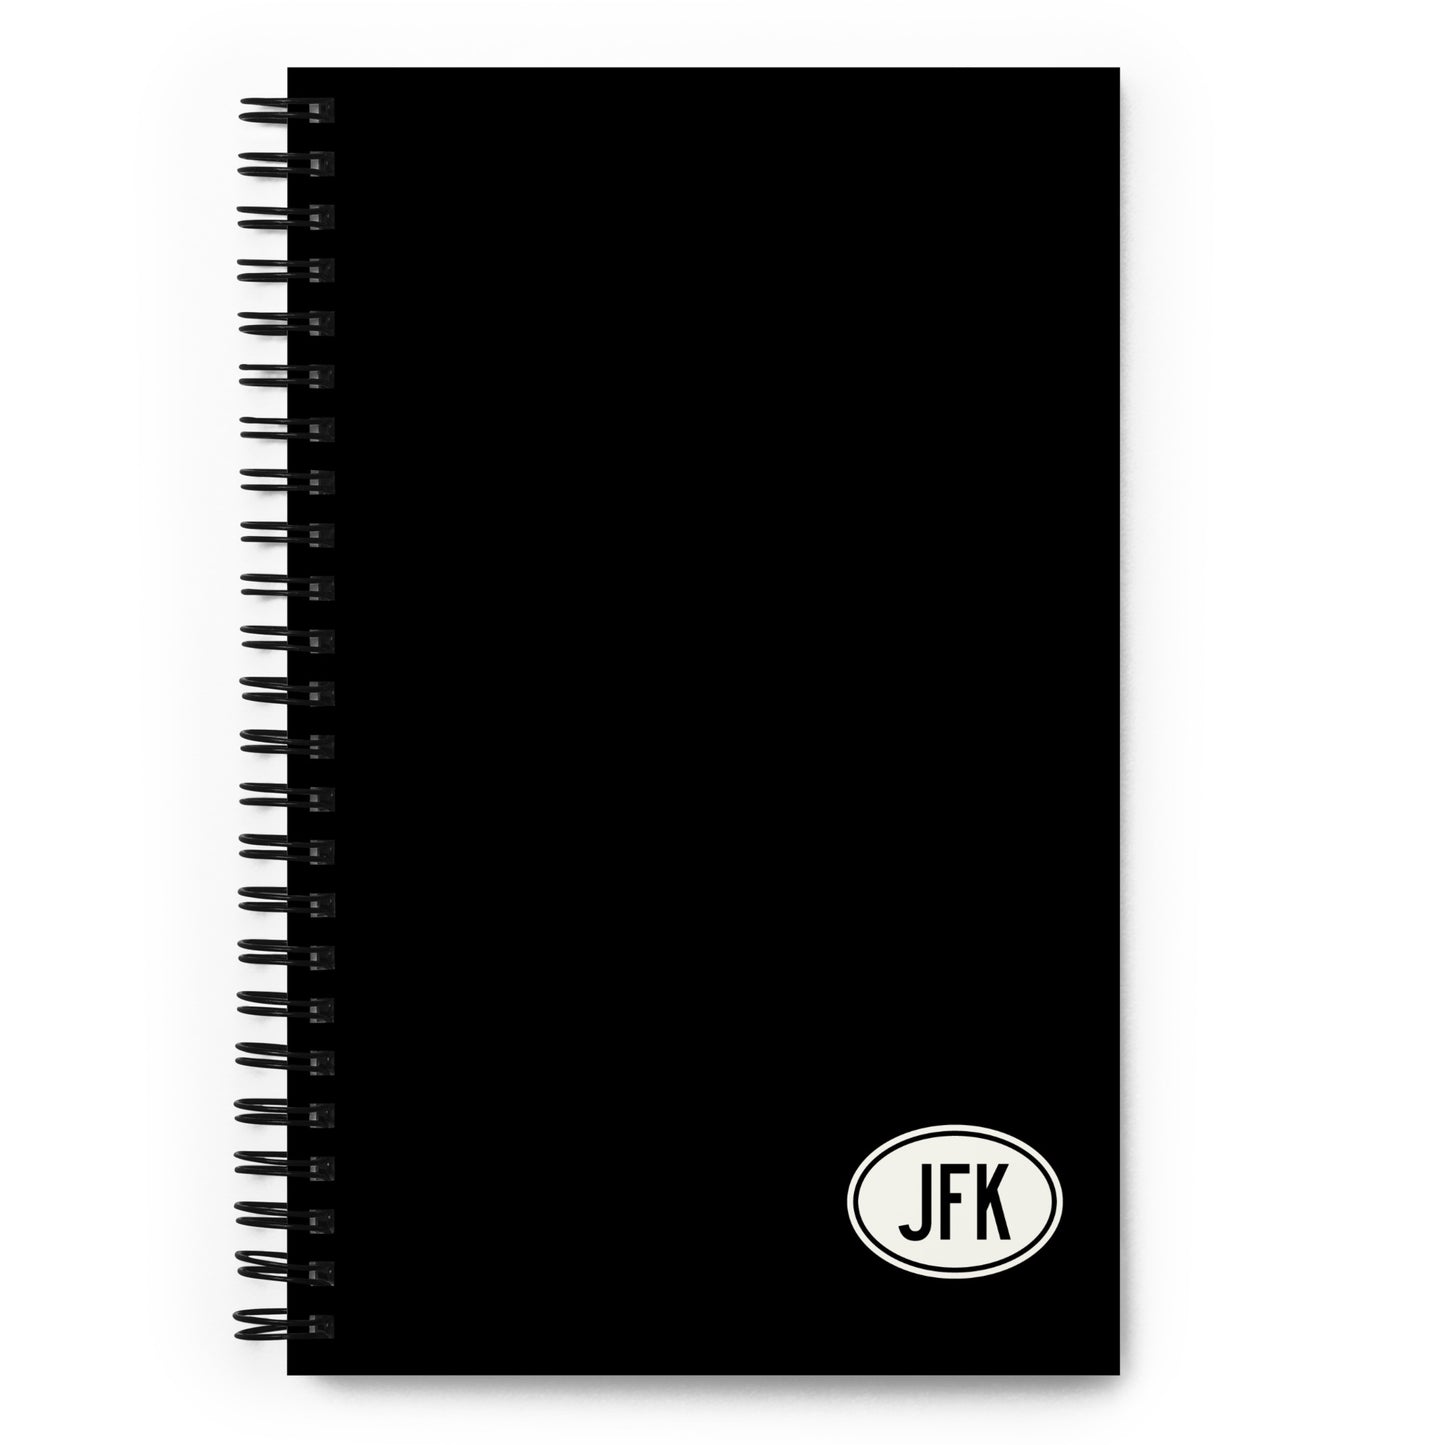 Unique Travel Gift Spiral Notebook - White Oval • JFK New York City • YHM Designs - Image 01